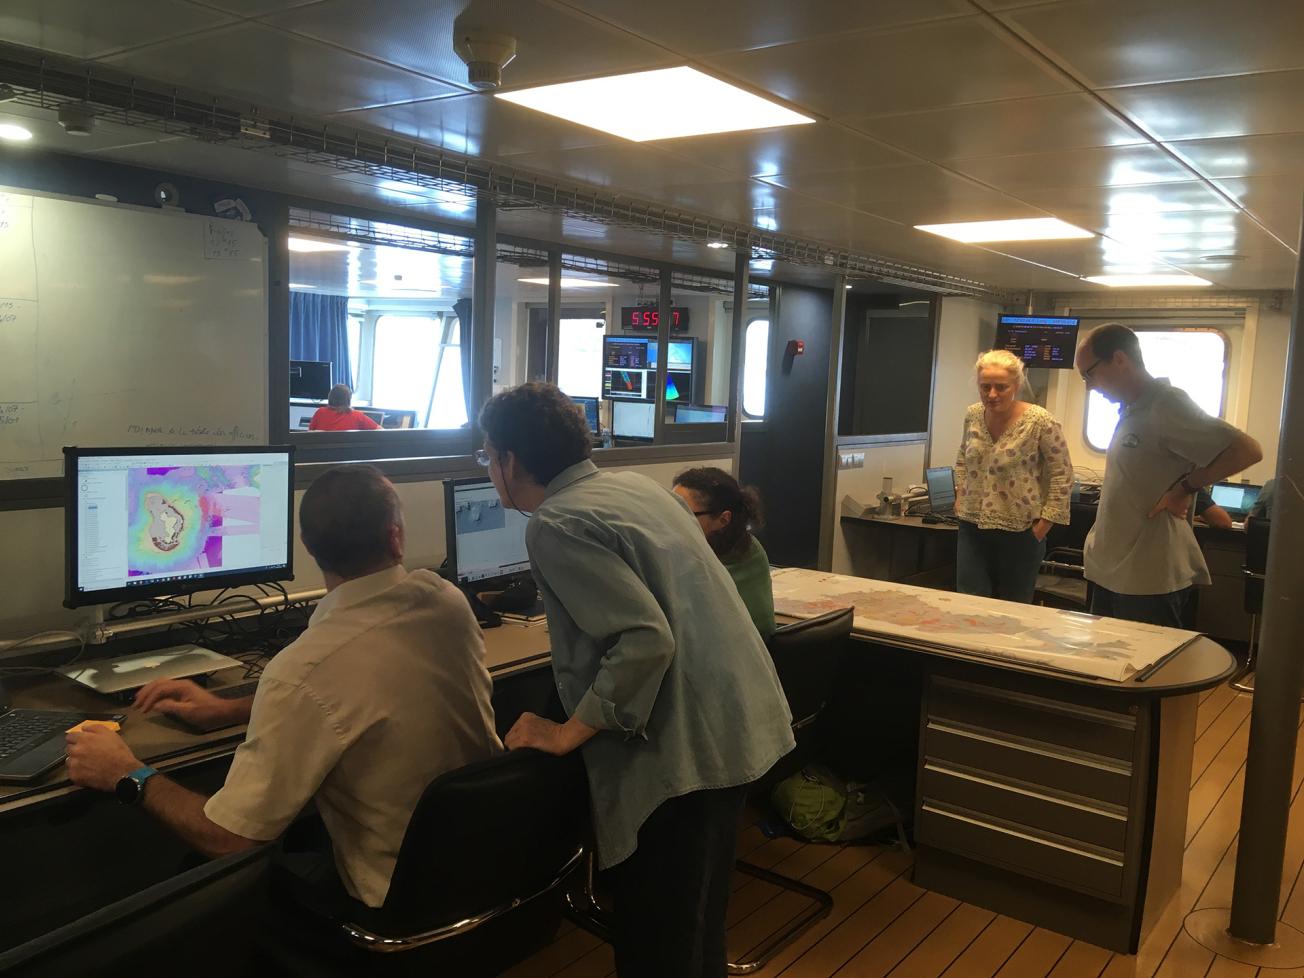  Three BRGM researchers participated in the seagoing measurement campaign on board the Marion-Dufresne oceanographic vessel  